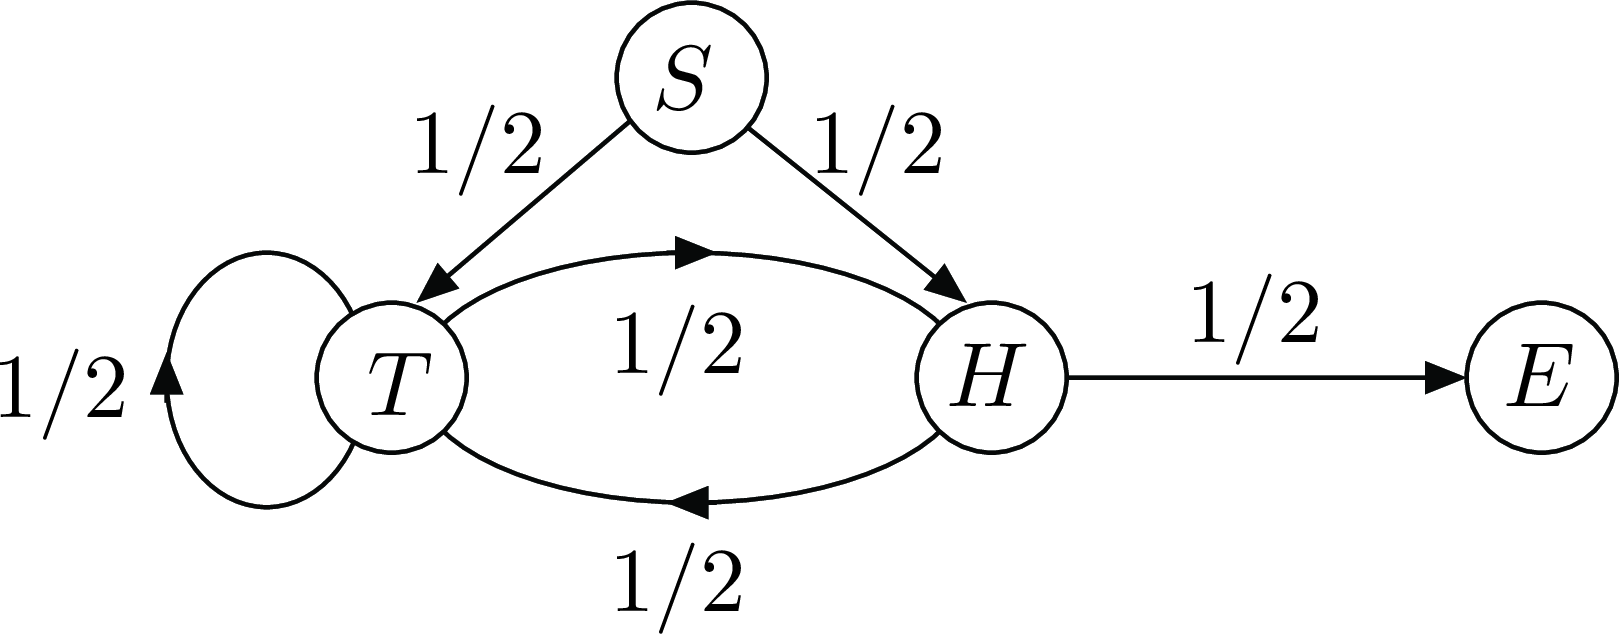 Figure 5: Flipping a fair coin until two heads in row.